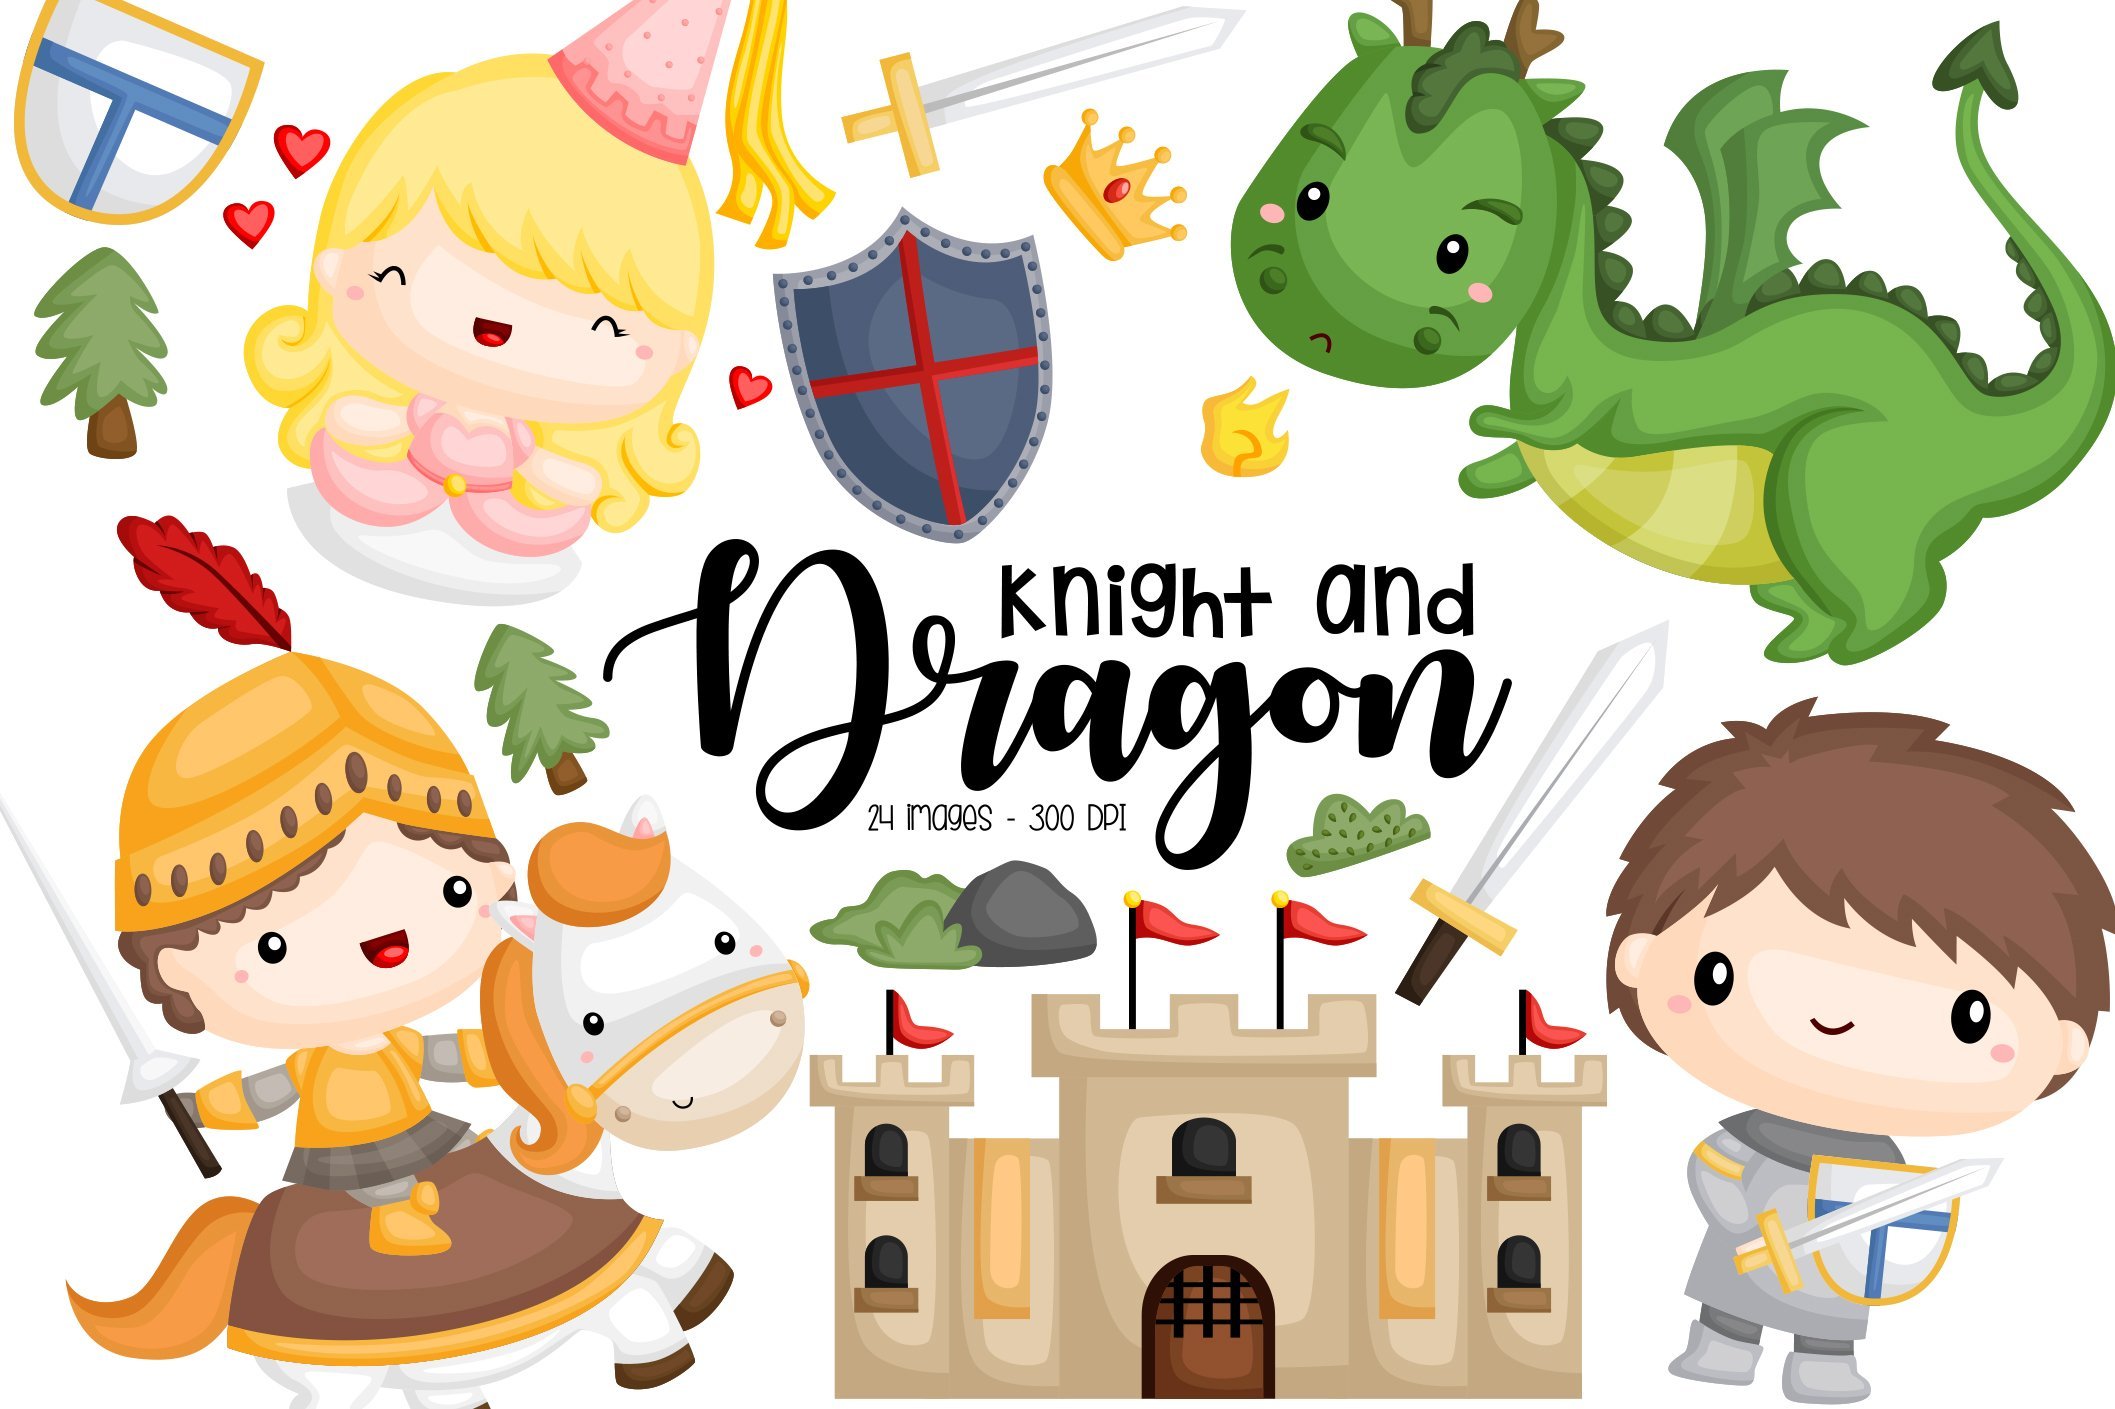 Knight, Princess, andDragon Clipart cover image.